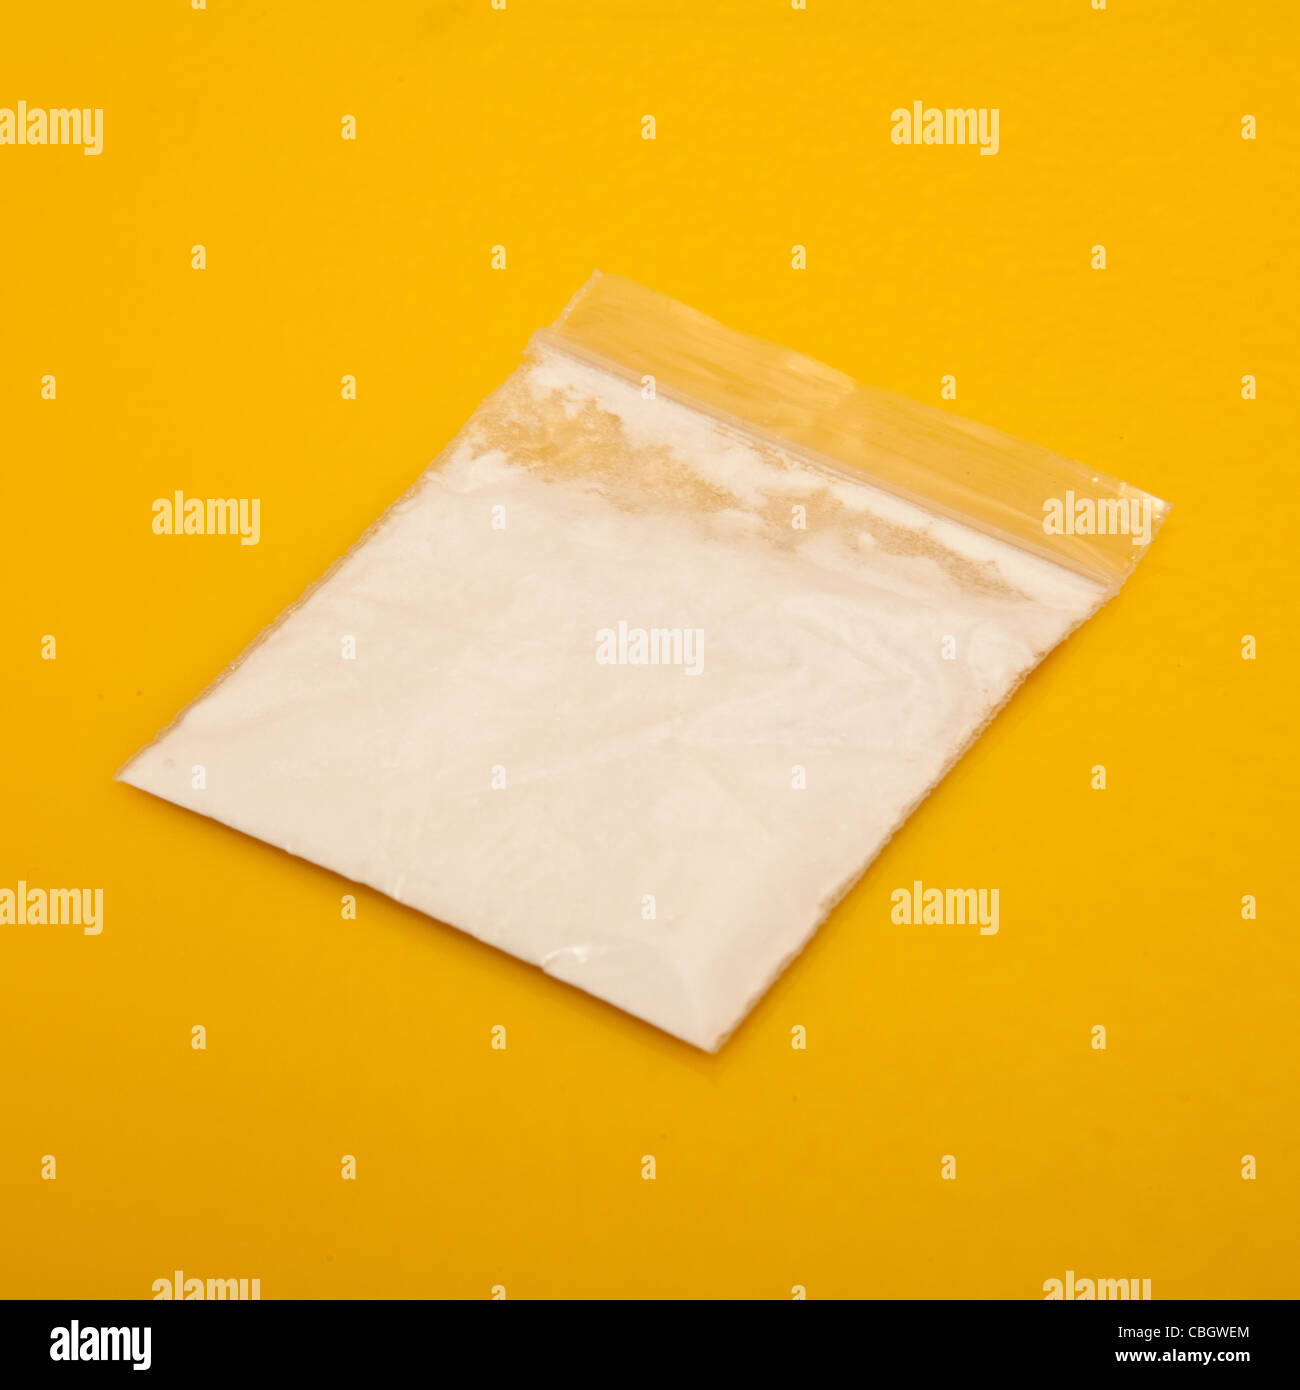 https://c8.alamy.com/comp/CBGWEM/mdai-a-narcotic-drug-sold-on-the-internet-as-a-research-chemical-with-CBGWEM.jpg